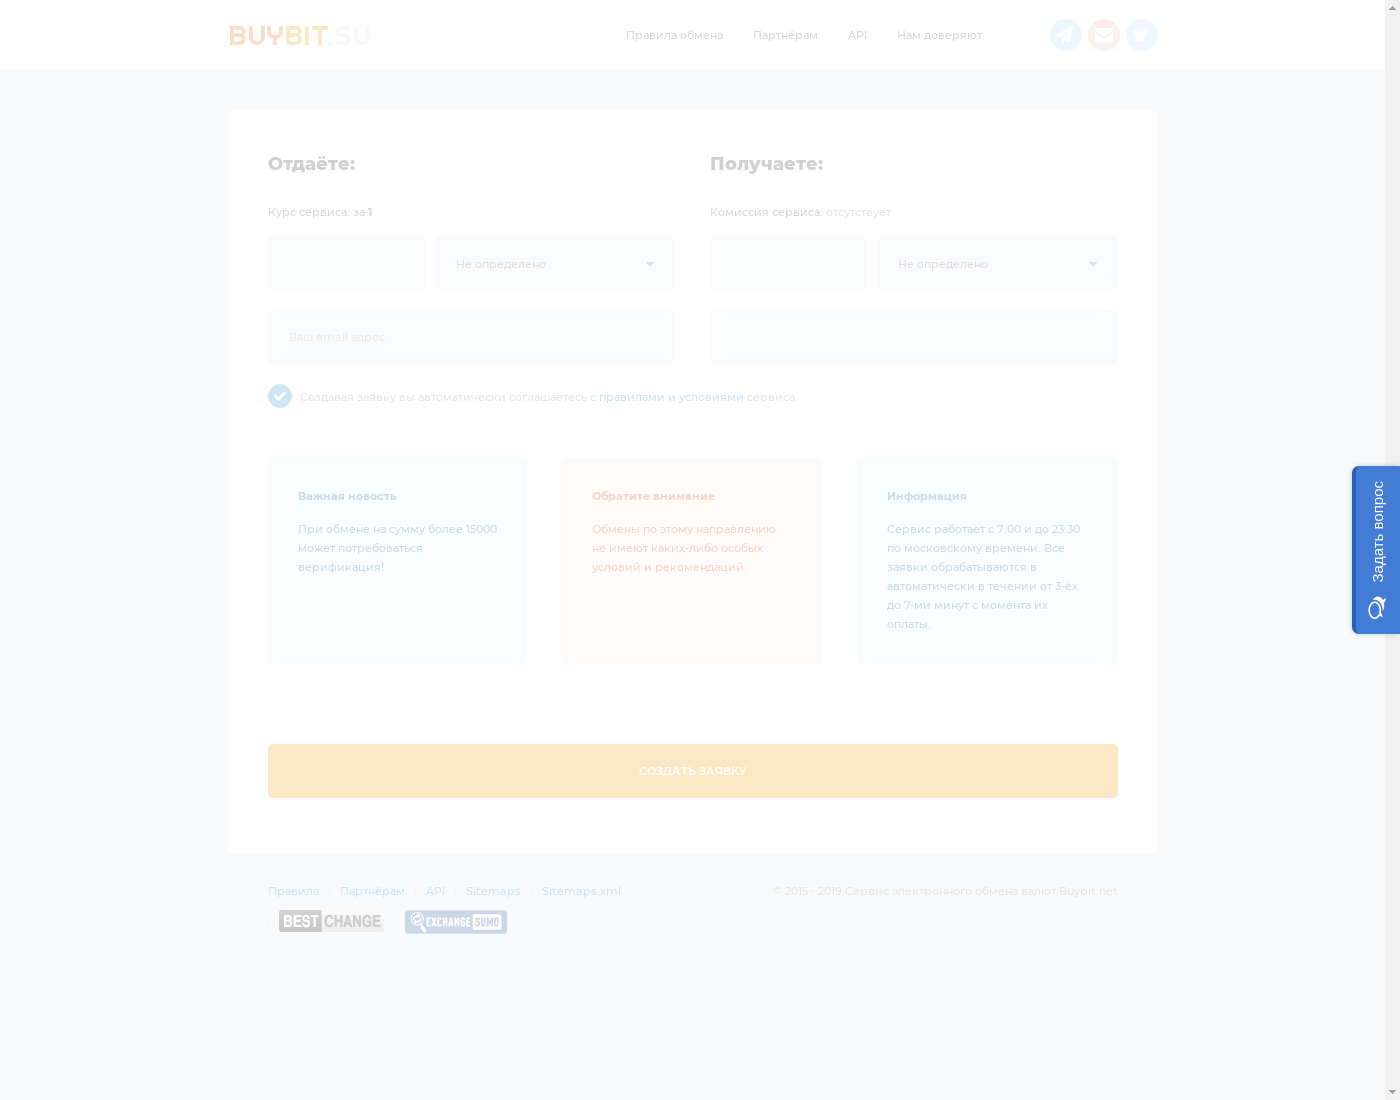 BuyBit user interface: the home page in English